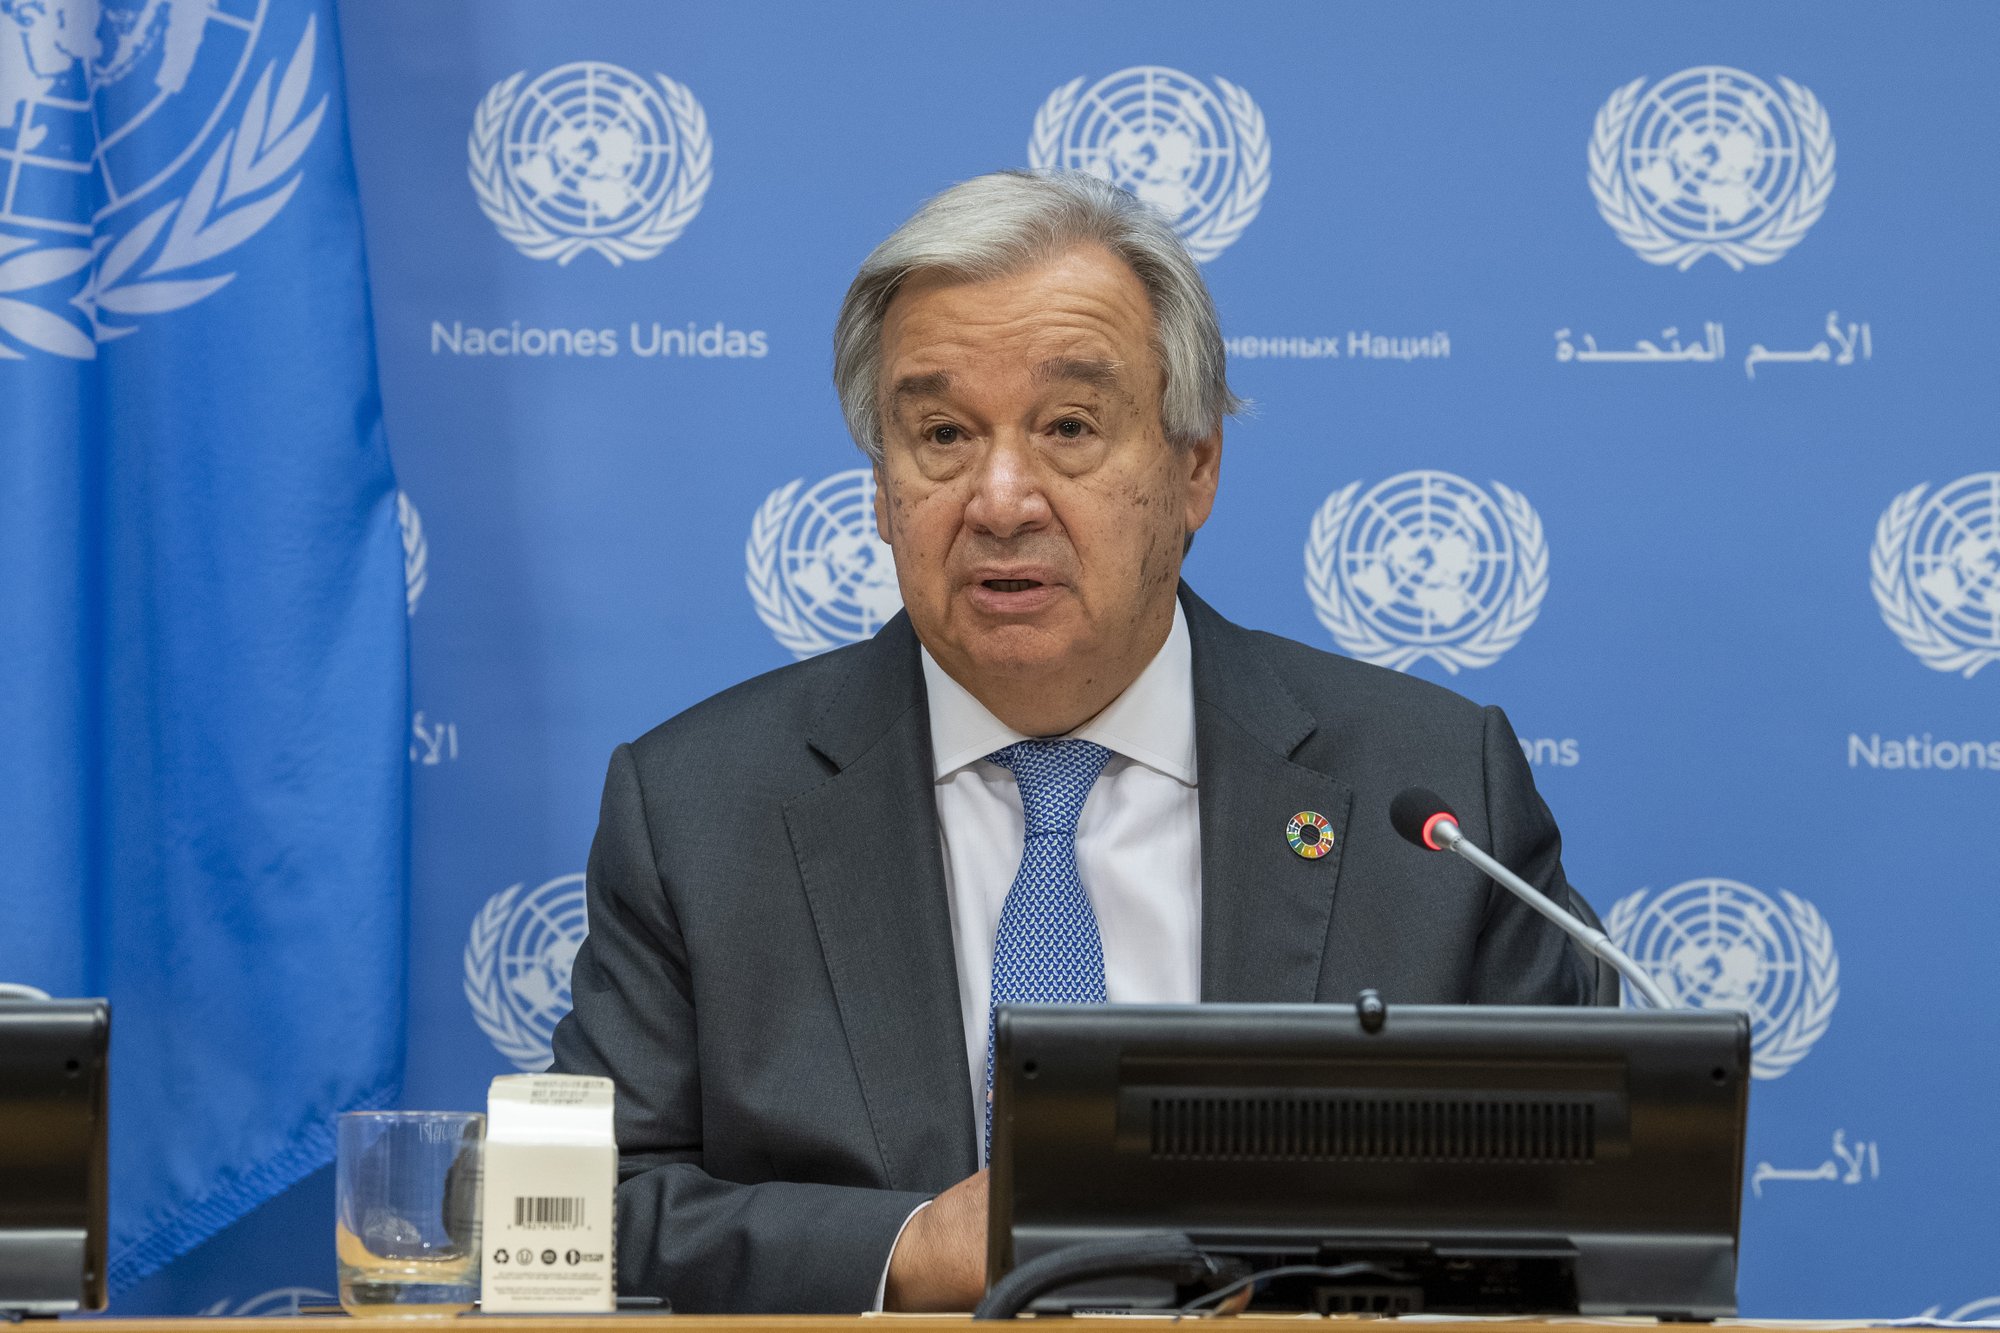 UN Secretary-General Calls for Elimination of Nuclear Weapons